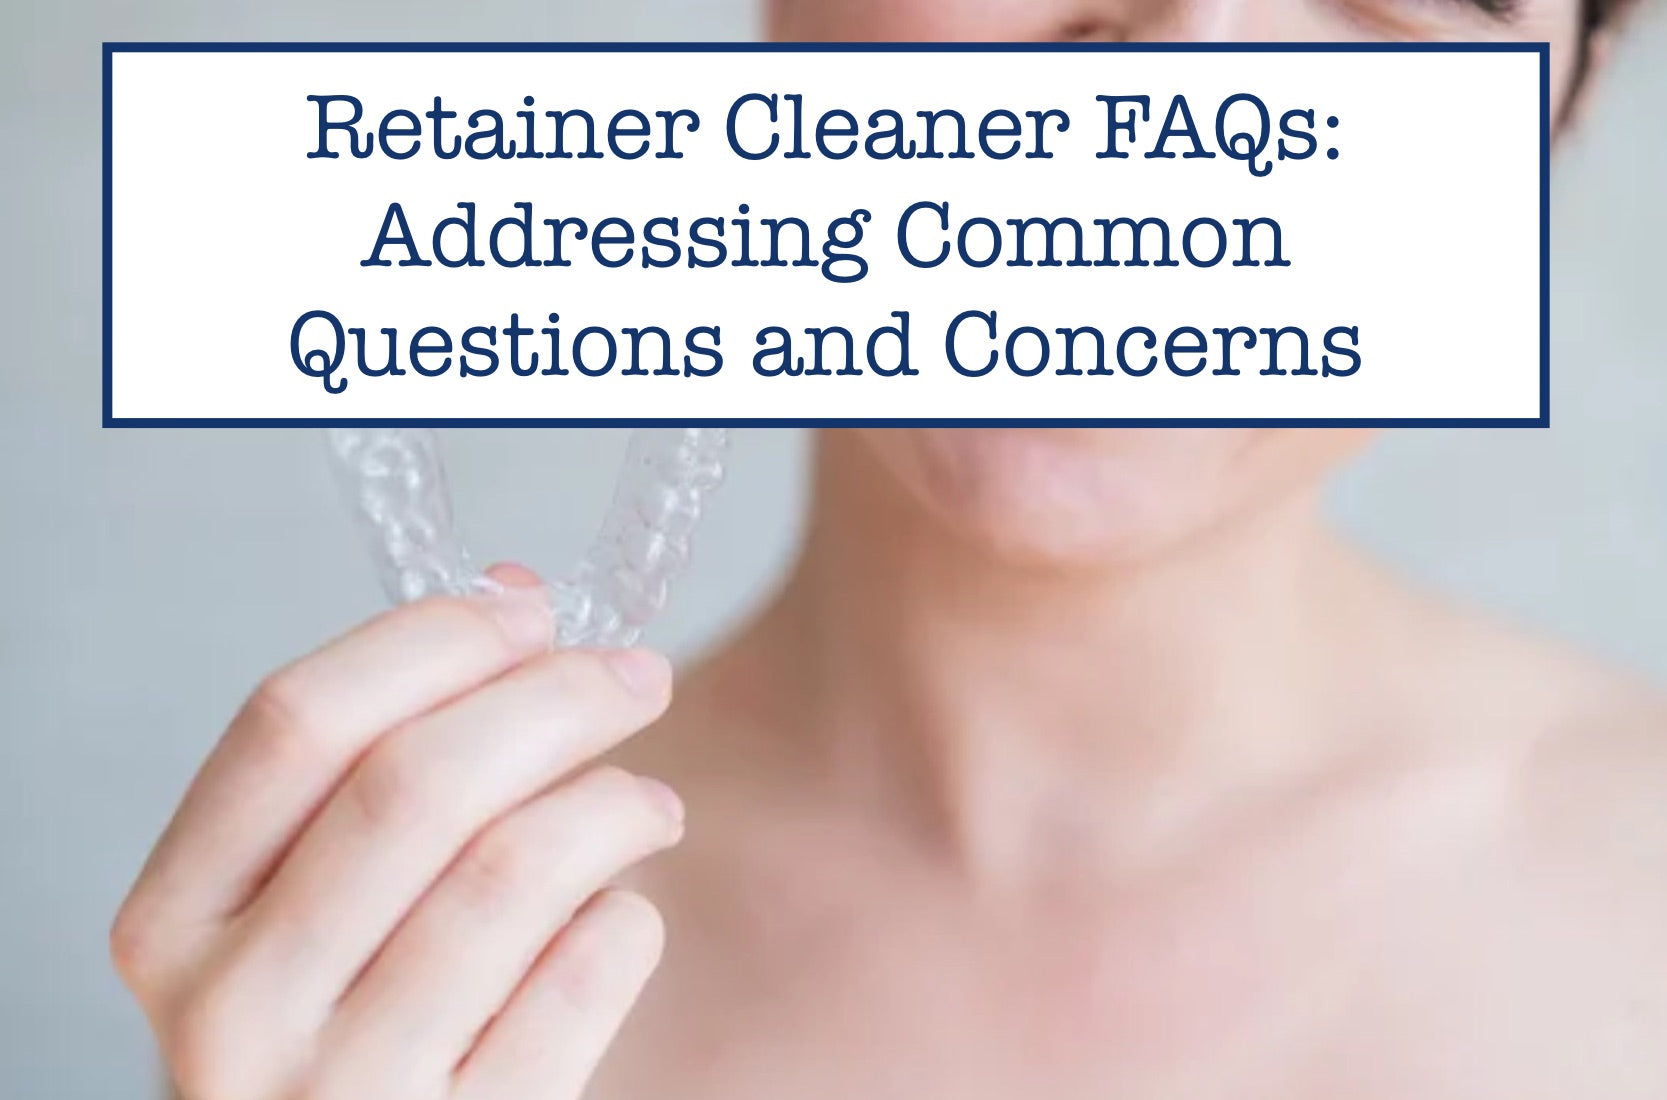 Retainer Cleaner FAQs: Addressing Common Questions and Concerns